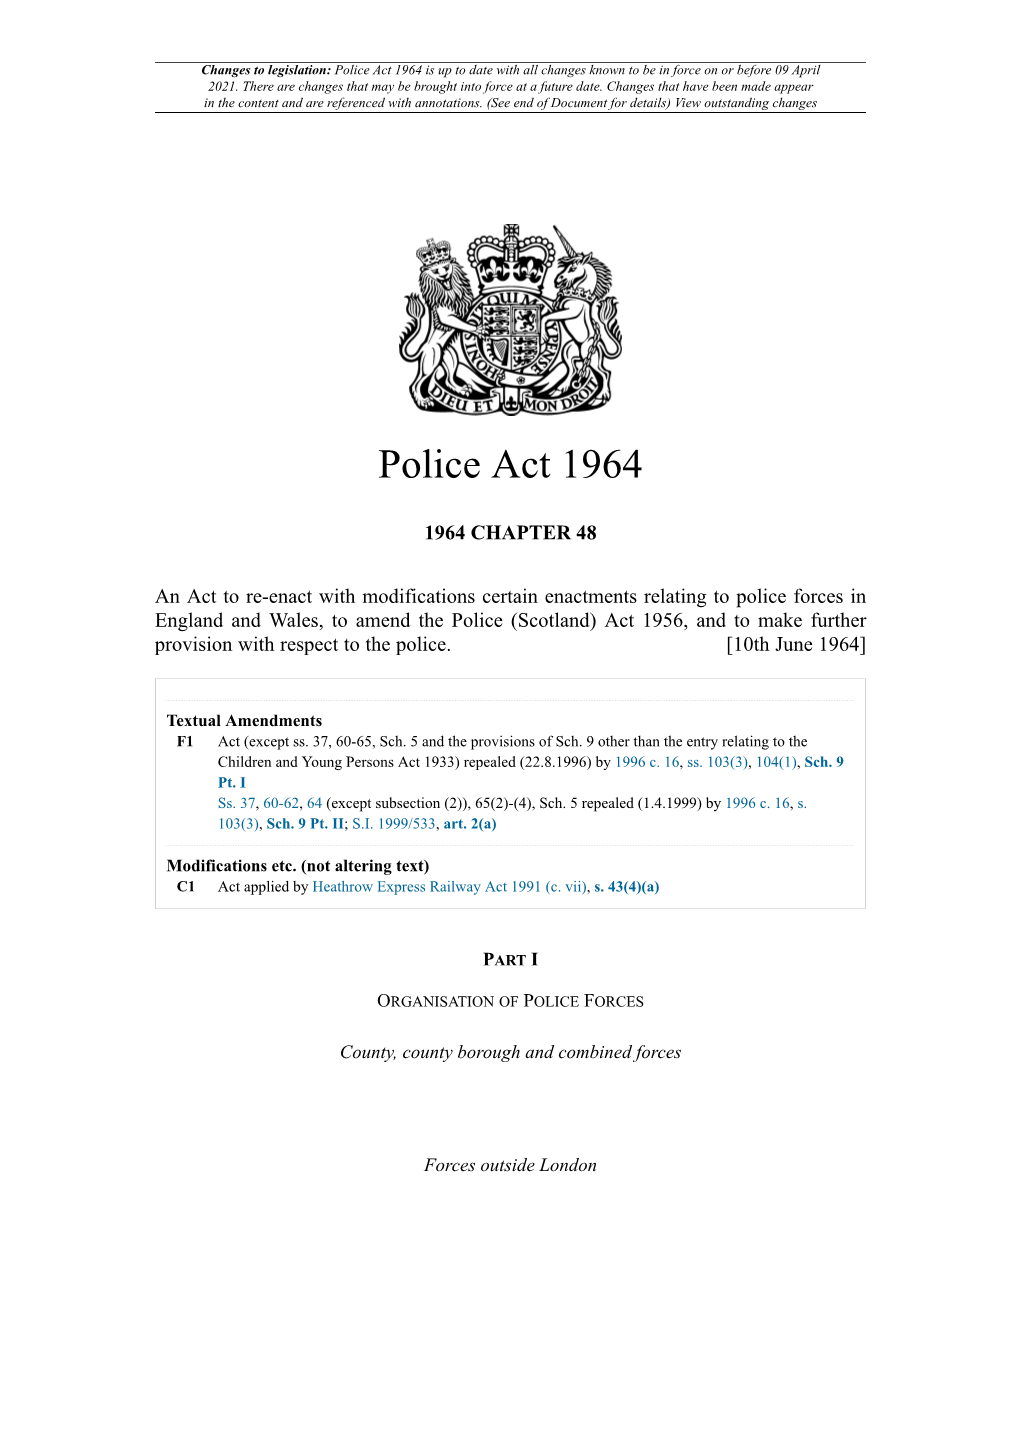 Police Act 1964 Is up to Date with All Changes Known to Be in Force on Or Before 09 April 2021